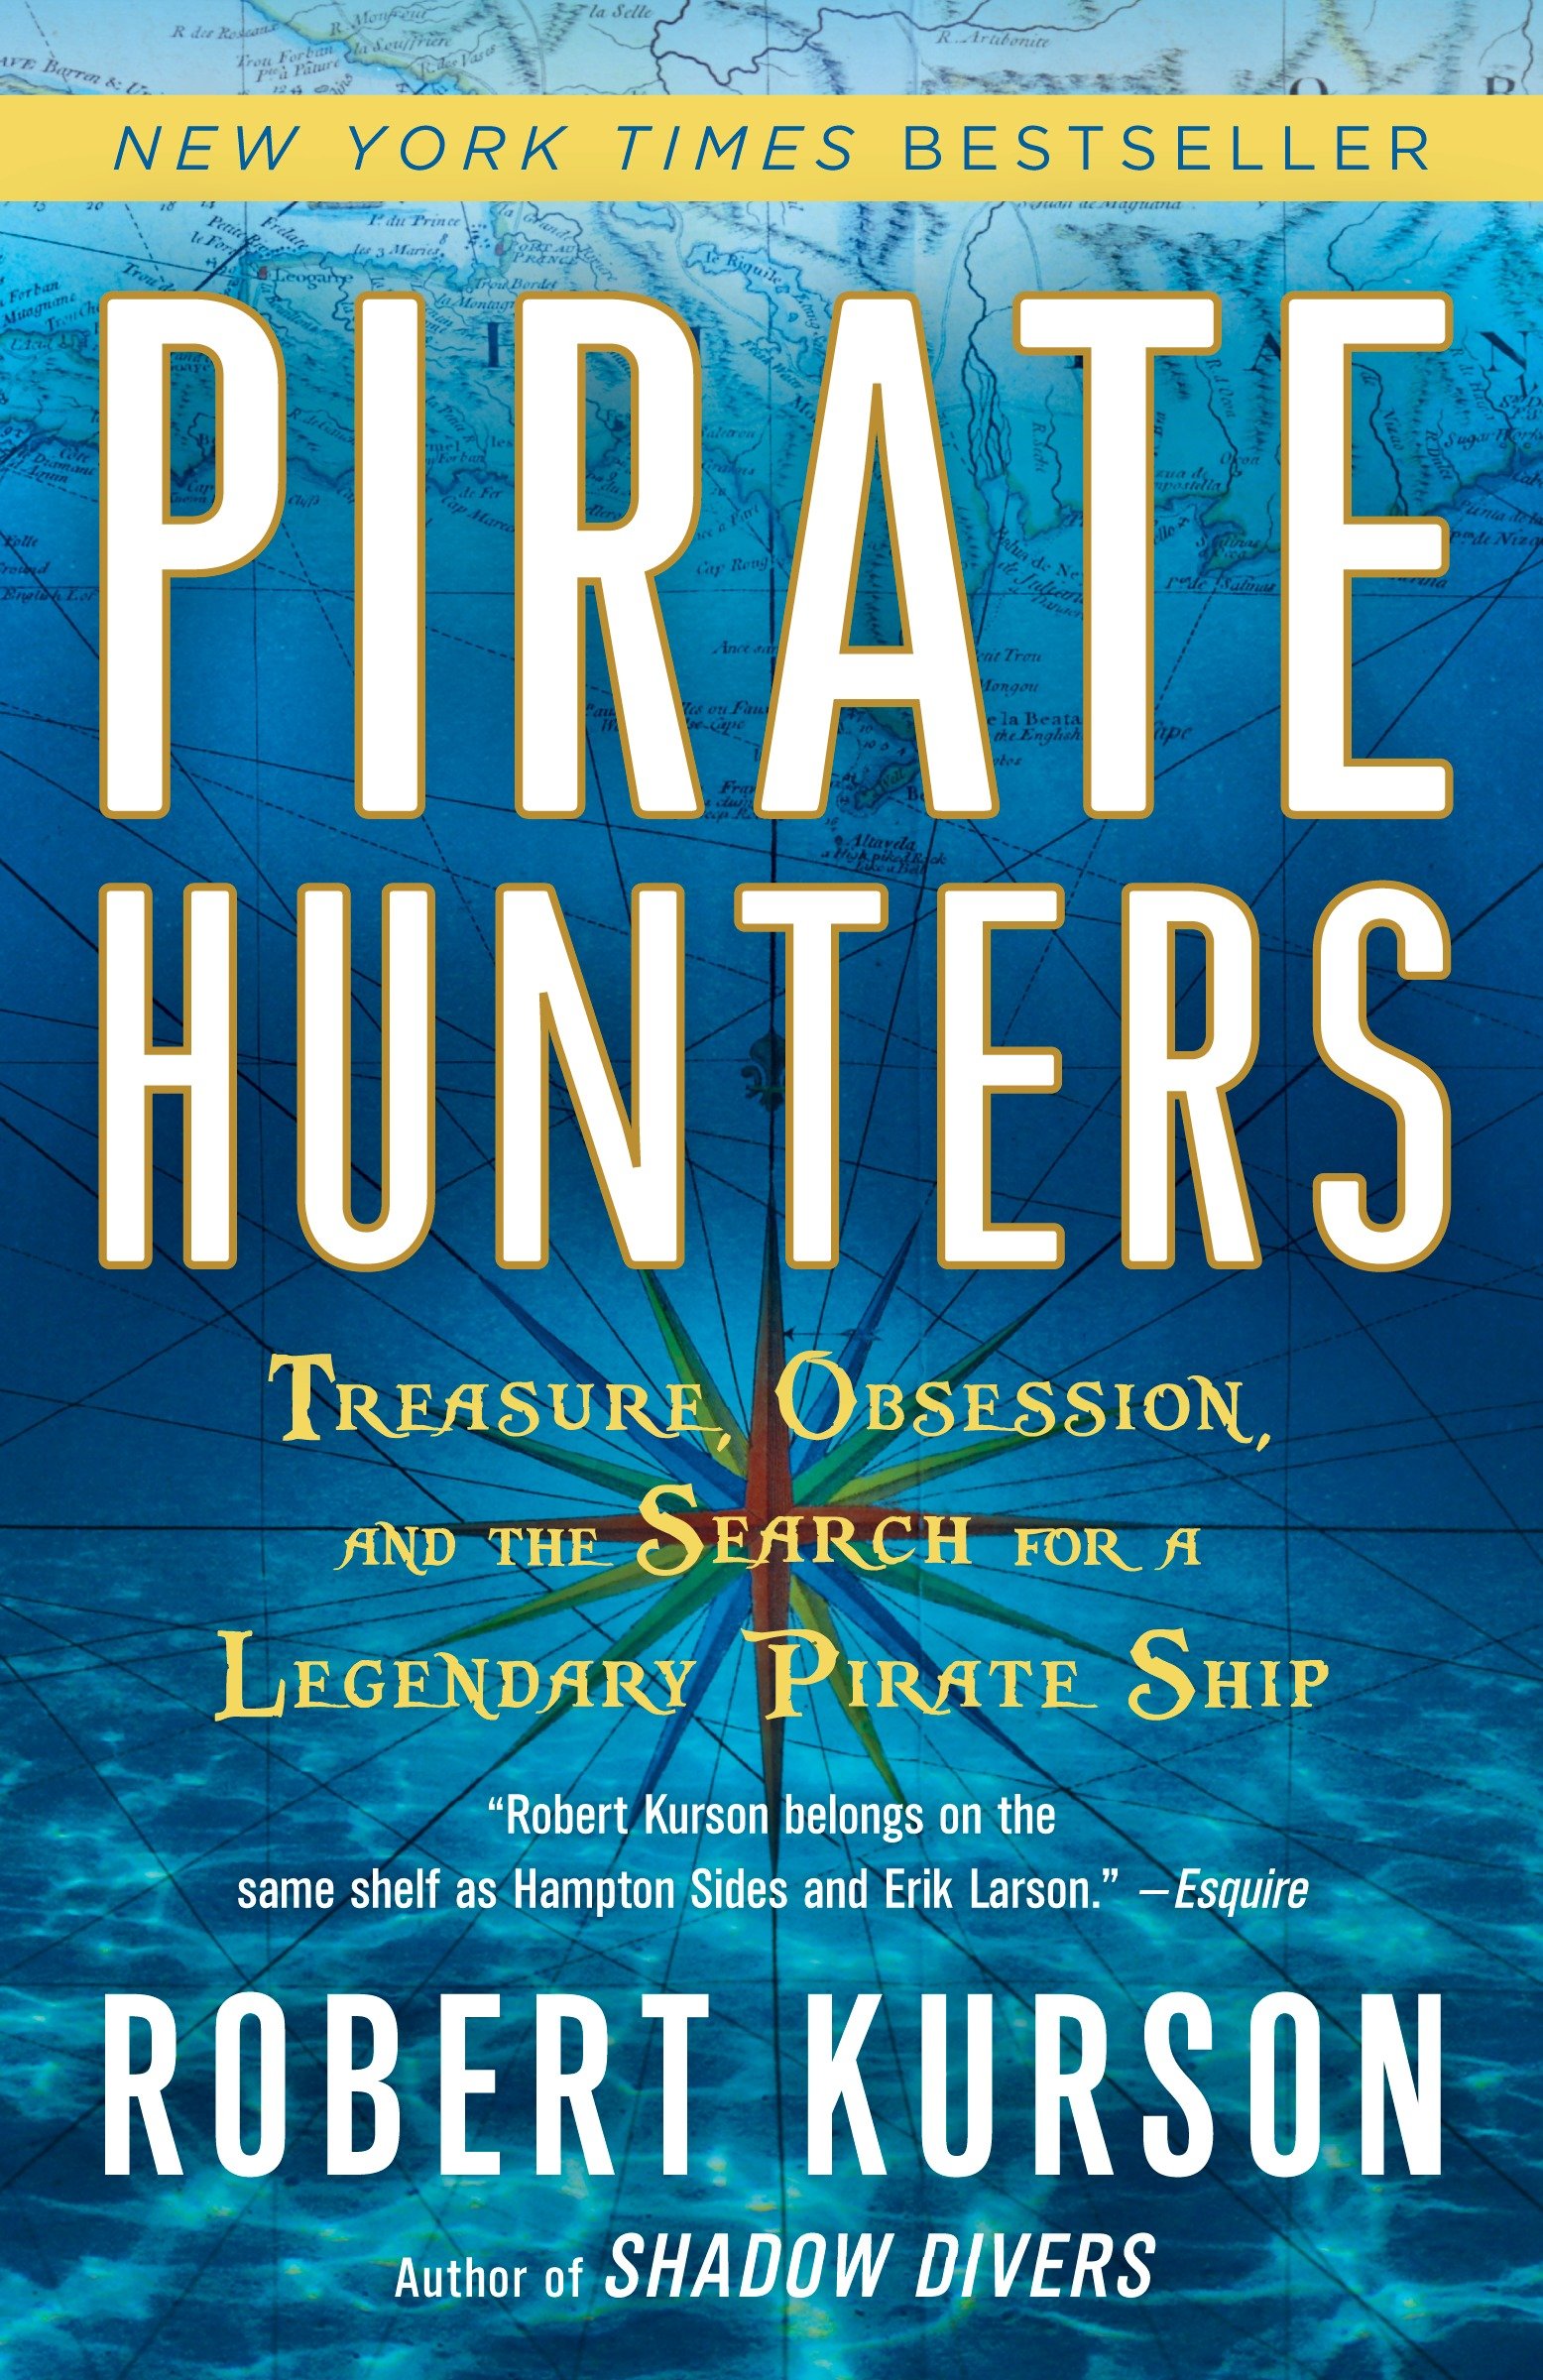 Imagen de portada para Pirate Hunters [electronic resource] : Treasure, Obsession, and the Search for a Legendary Pirate Ship